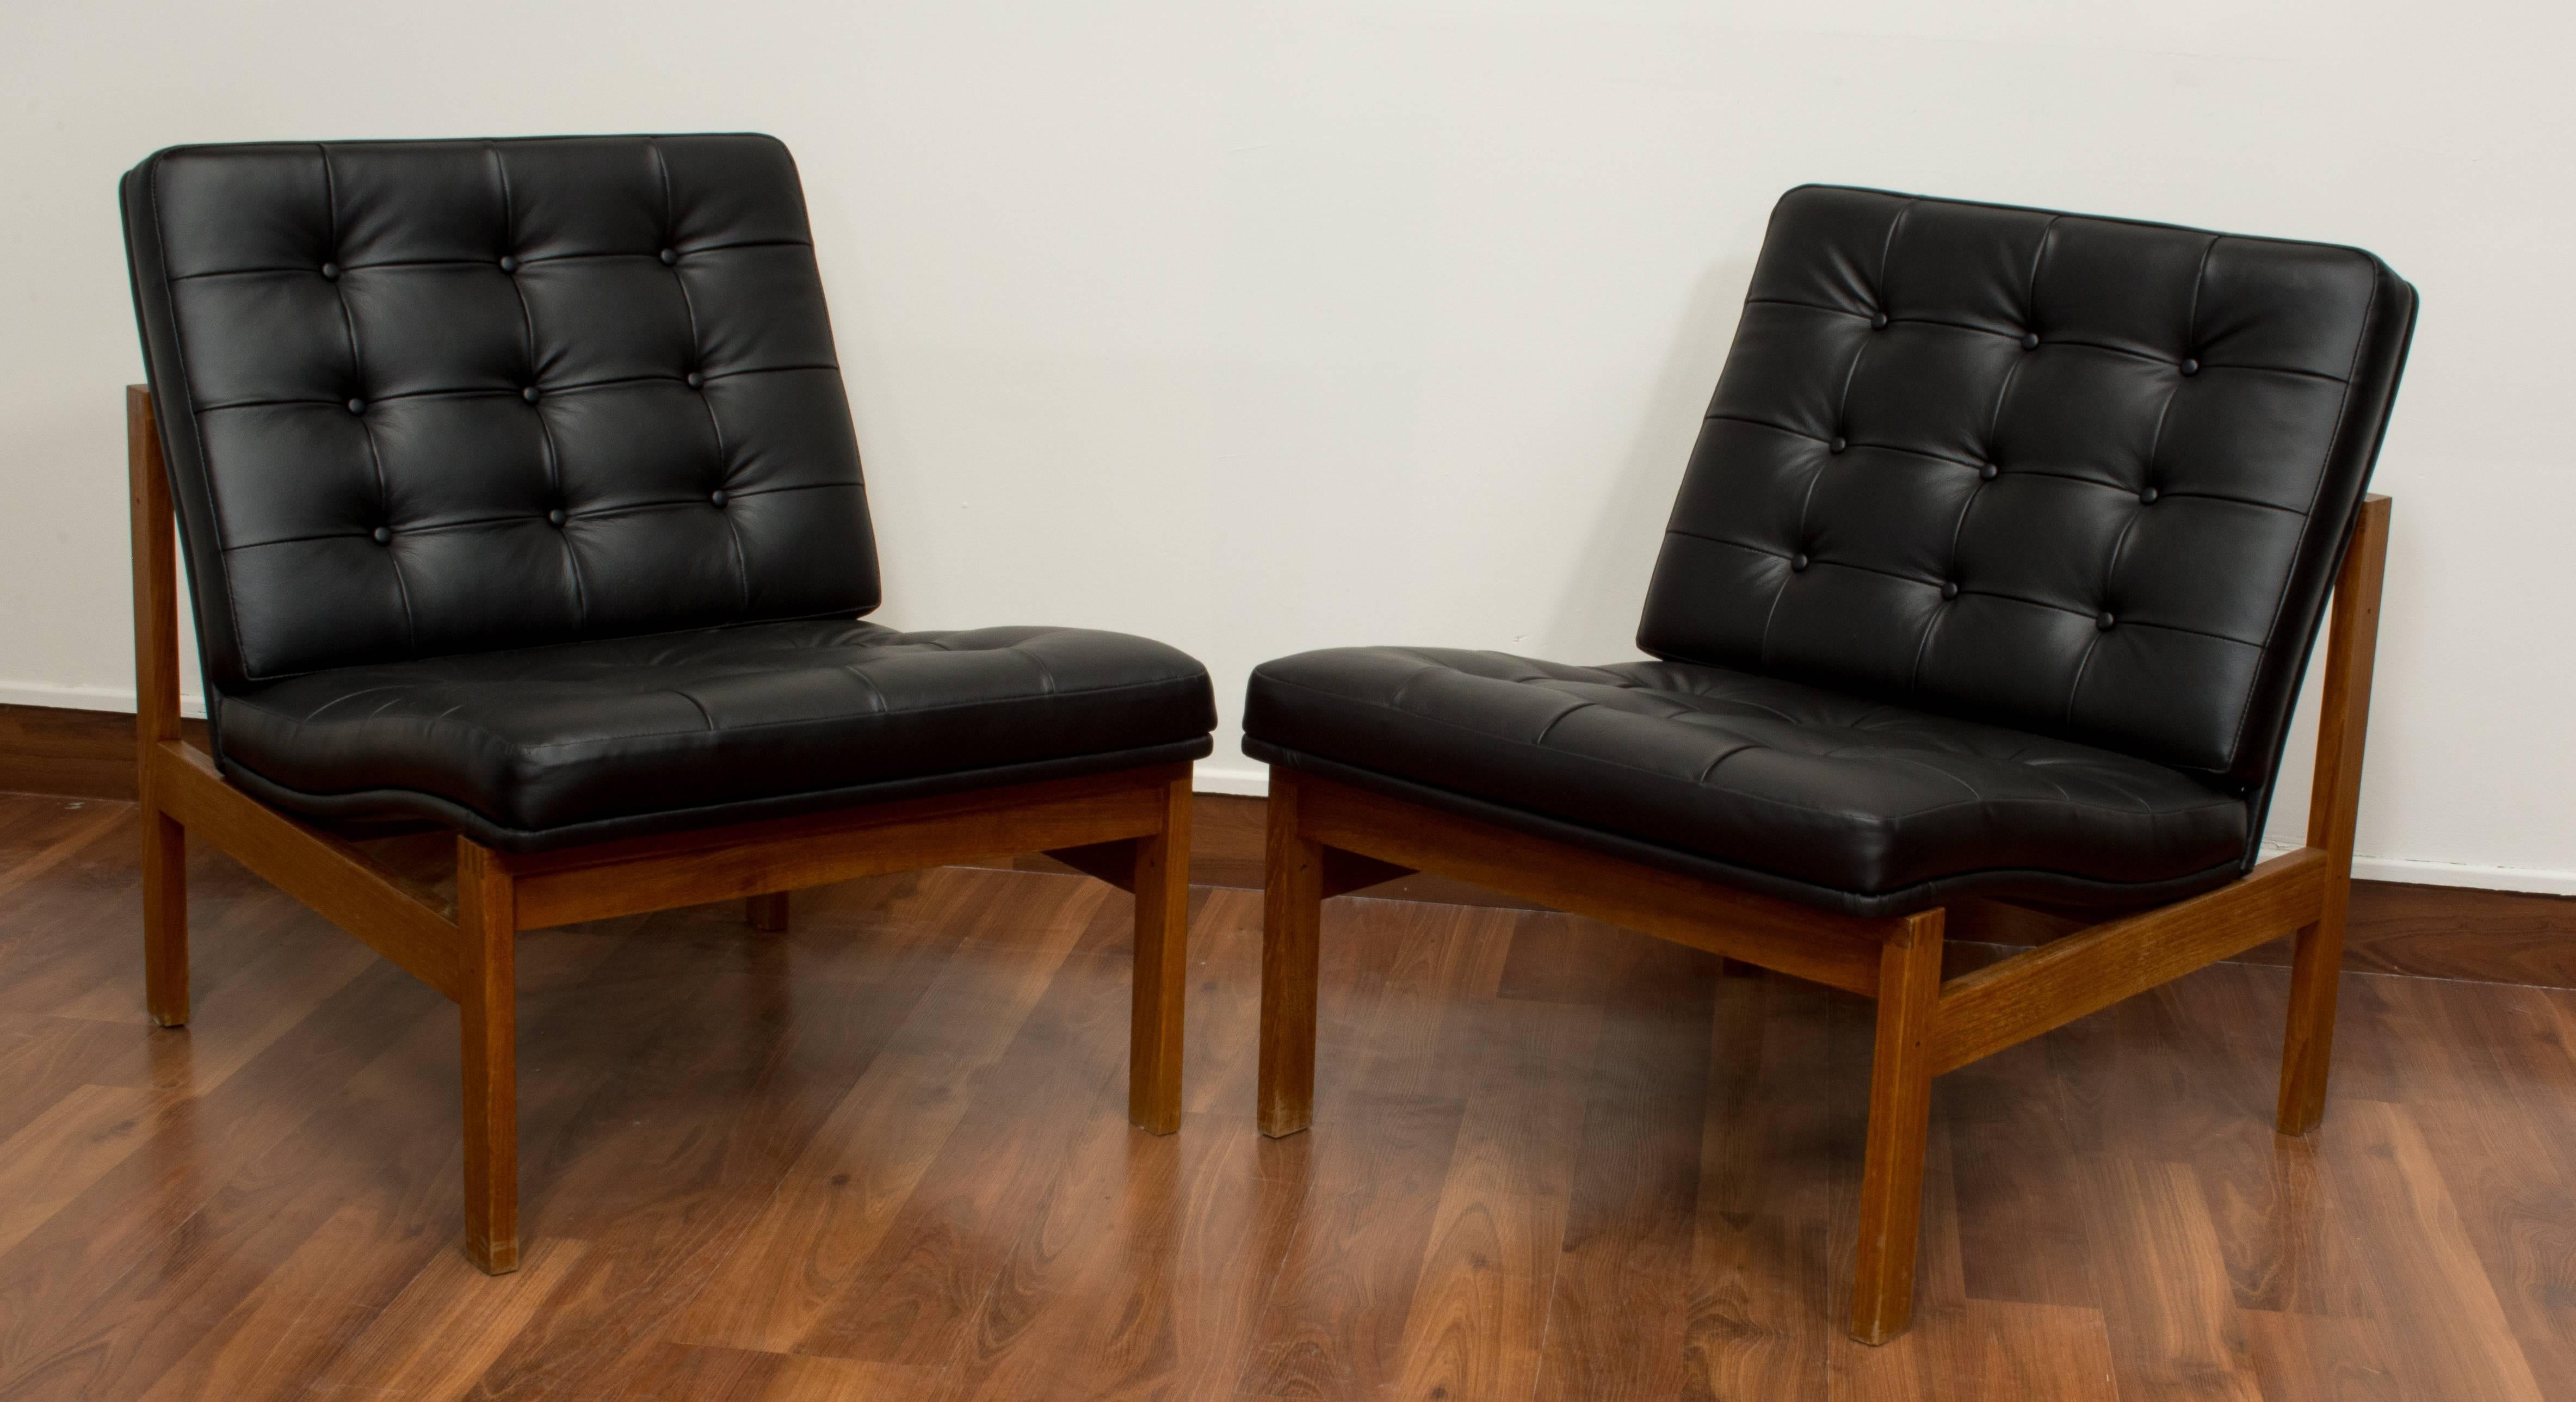 Danish Modular Chairs of Teak Covered with Black, Buttoned Leather